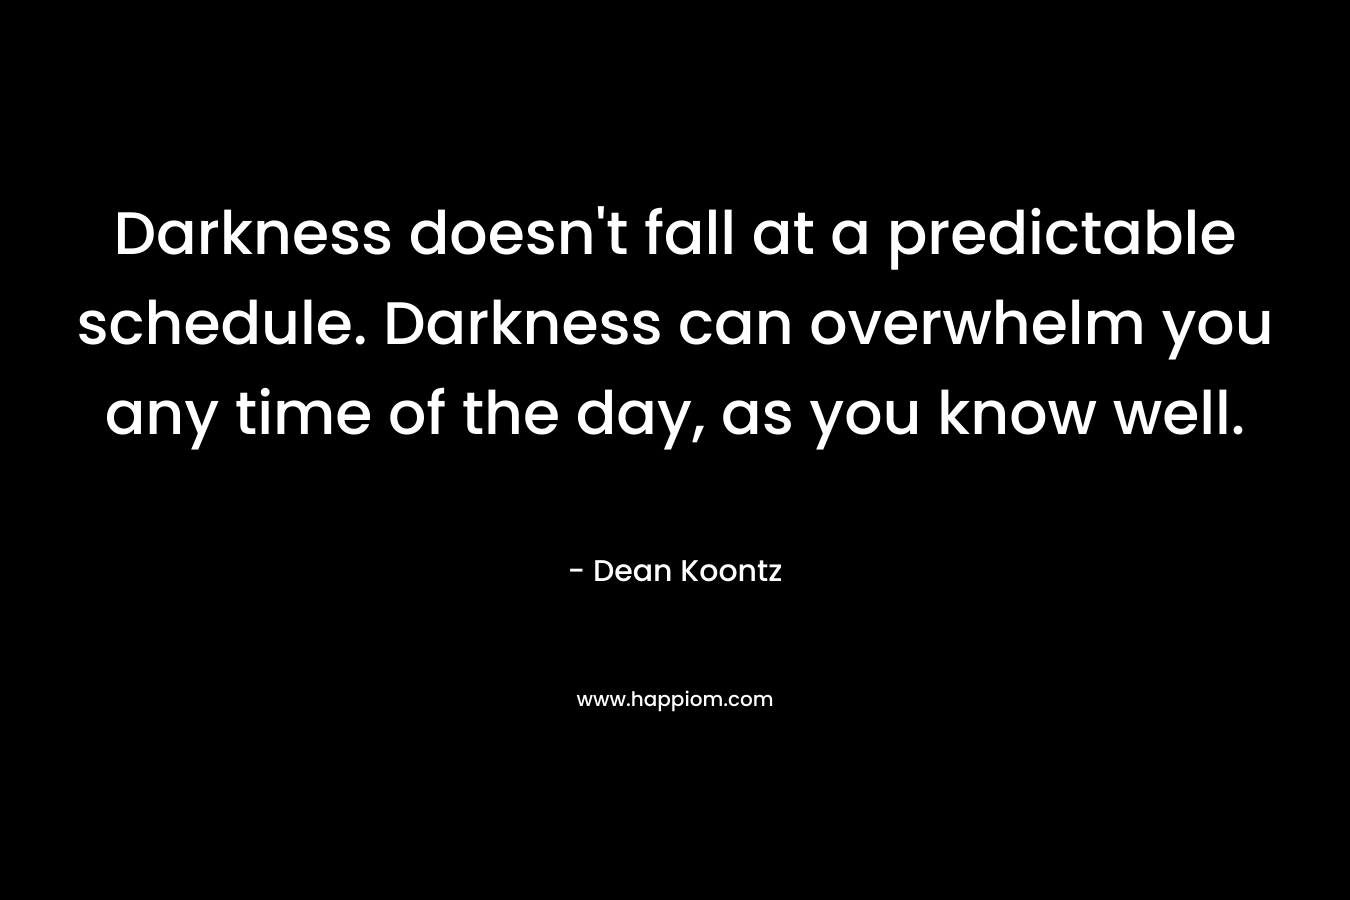 Darkness doesn't fall at a predictable schedule. Darkness can overwhelm you any time of the day, as you know well.